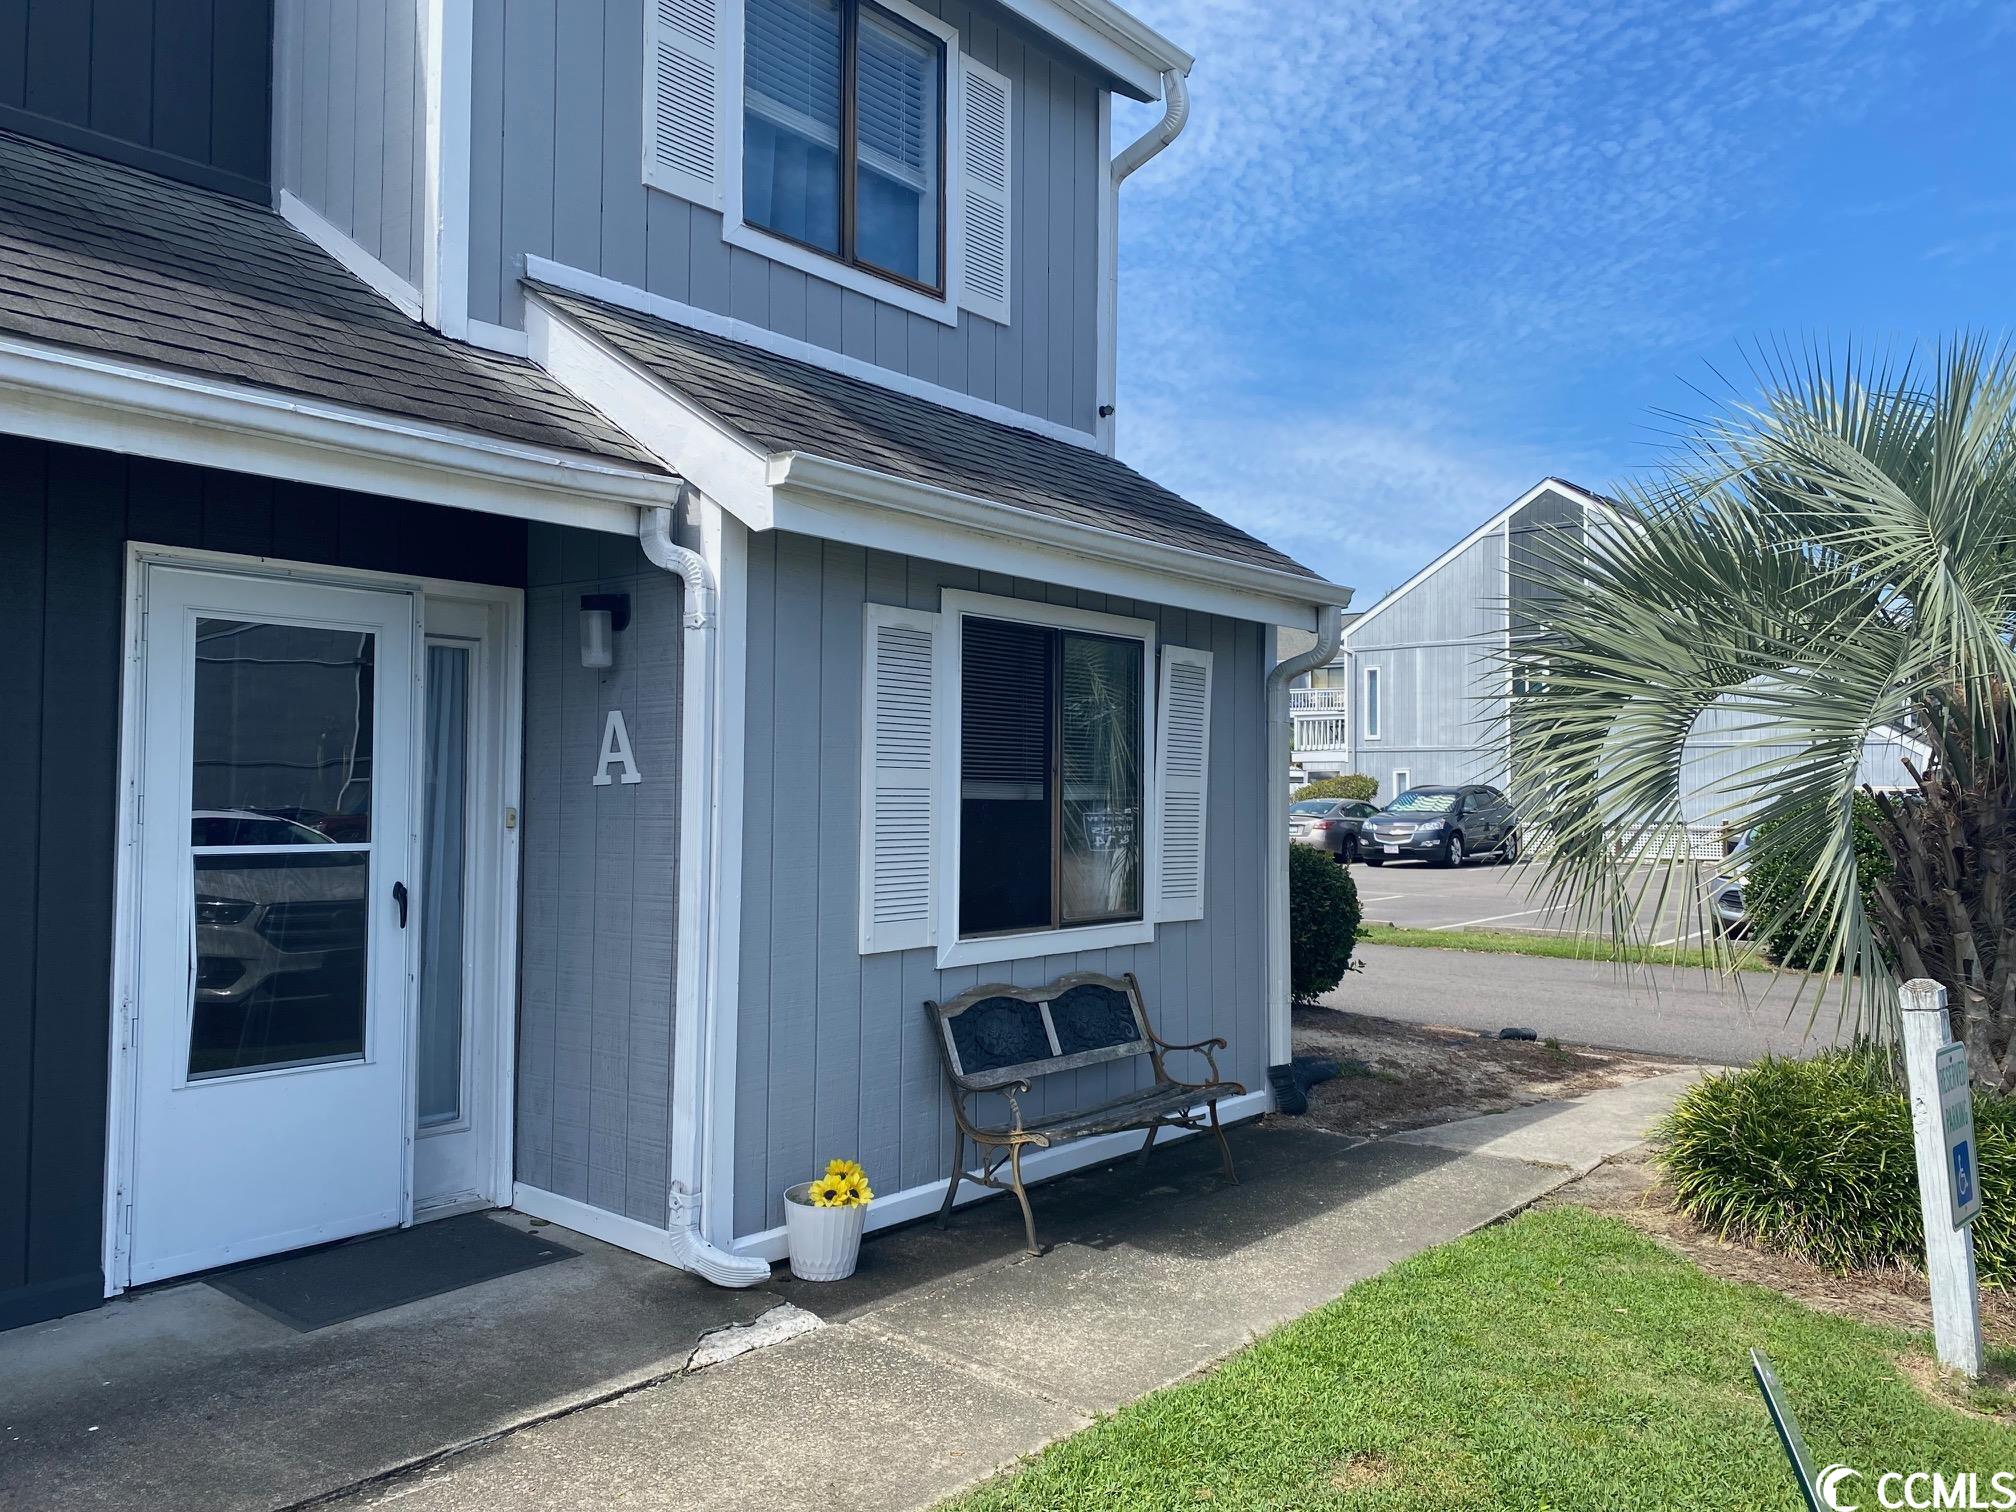 rare first floor end unit in baytree golf colony.   one bedroom, one and one half baths, screened porch overlooks pool.  indoor pool is also on property.  perfect location for primary , second home, or rental property.  close to medical facilities, shopping, dining, and cherry grove beach.